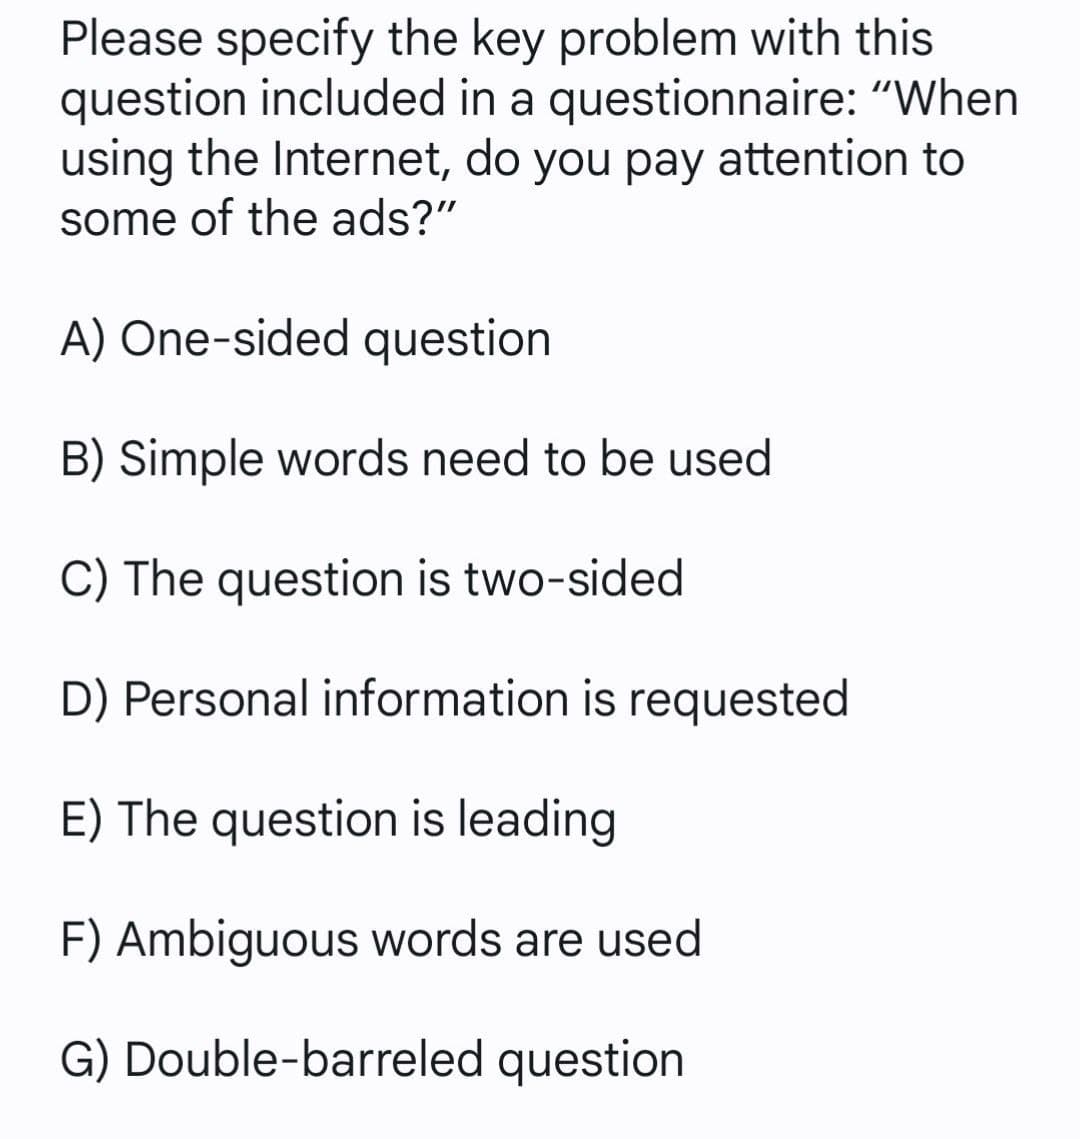 Please specify the key problem with this
question included in a questionnaire: "When
using the Internet, do you pay attention to
some of the ads?"
A) One-sided question
B) Simple words need to be used
C) The question is two-sided
D) Personal information is requested
E) The question is leading
F) Ambiguous words are used
G) Double-barreled question
